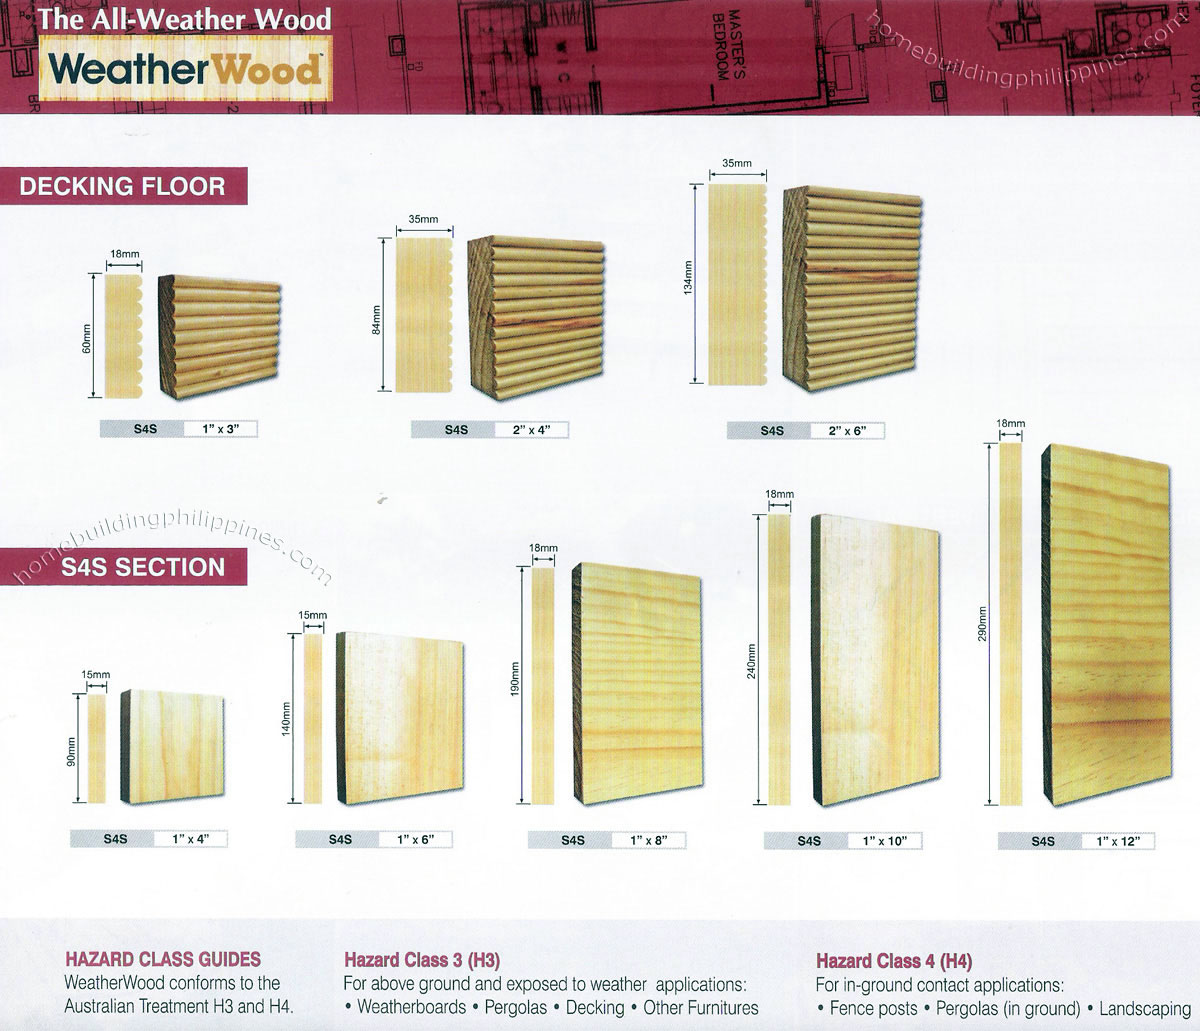 WeatherWood all-weather wood for decking floor